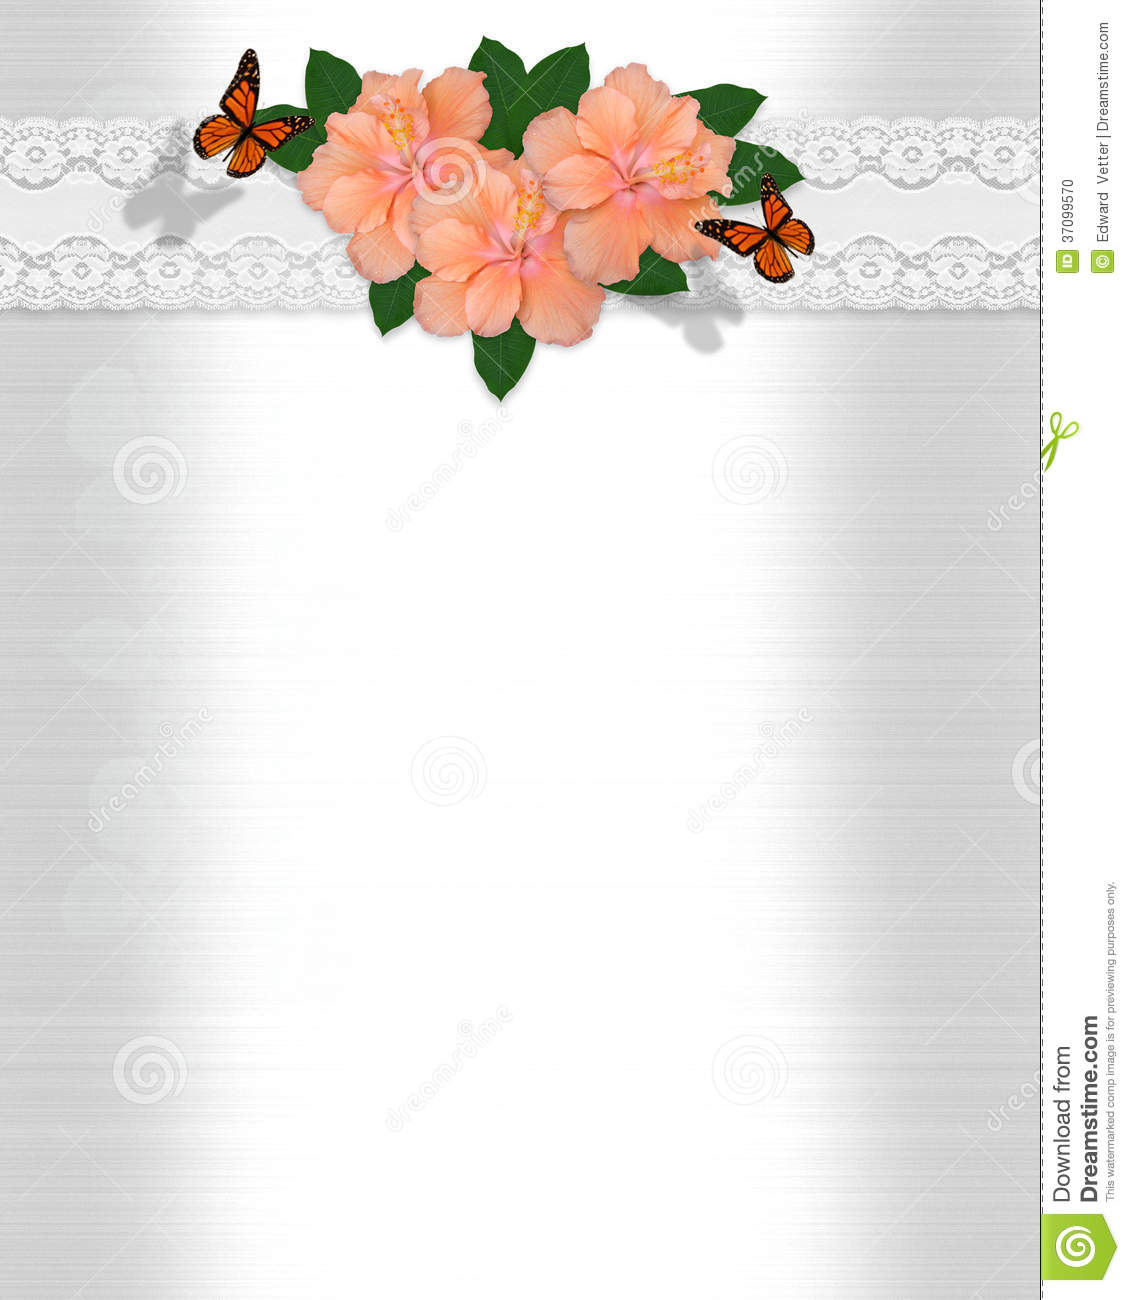 Of Beautiful Peach Color Hibiscus Flowers White Lace Border    